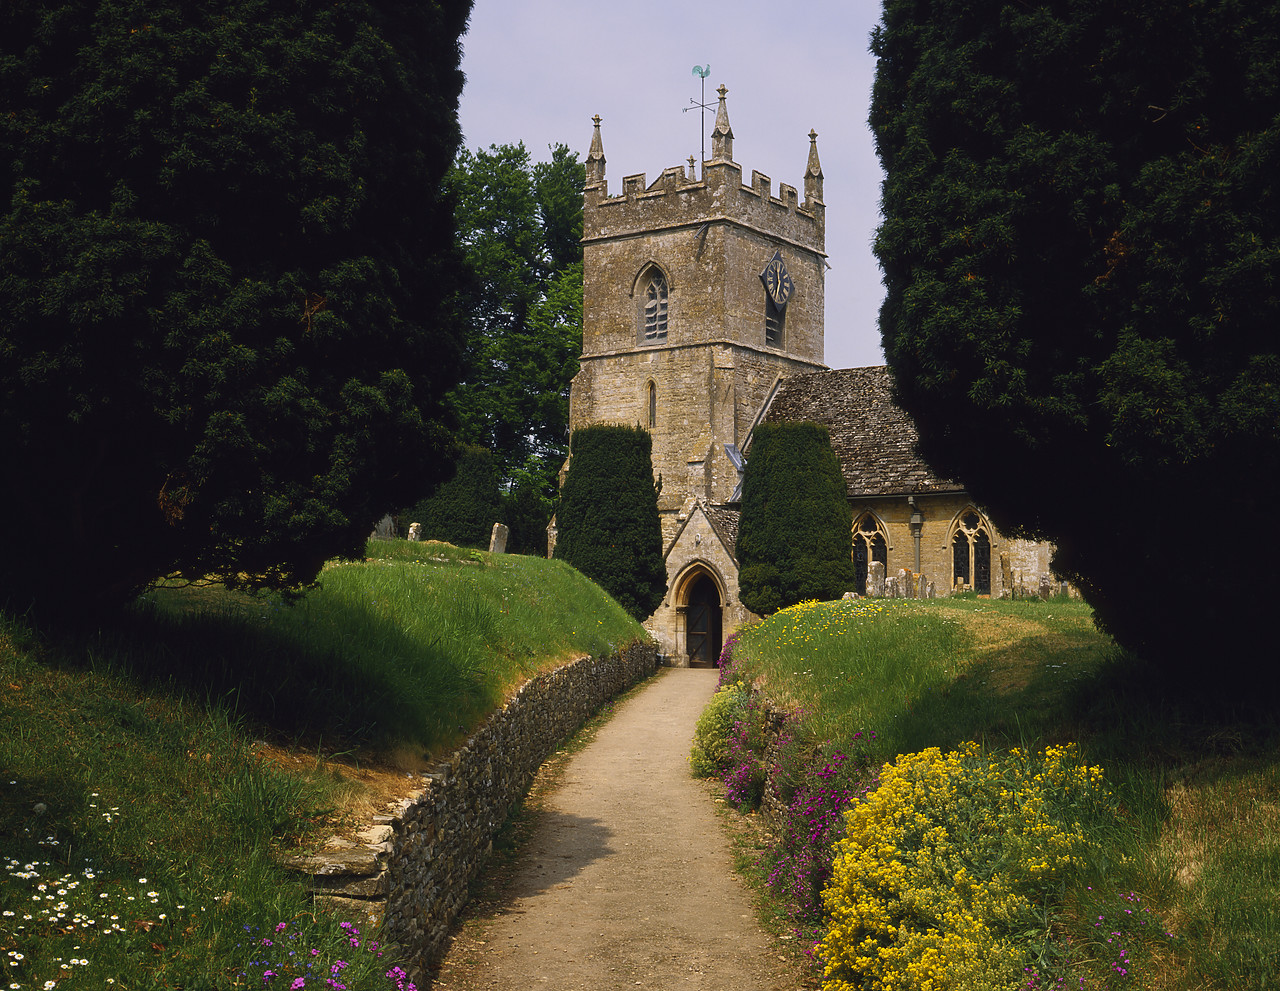 #924007-1 - Church at Upper Slaughter, Gloucestershire, England